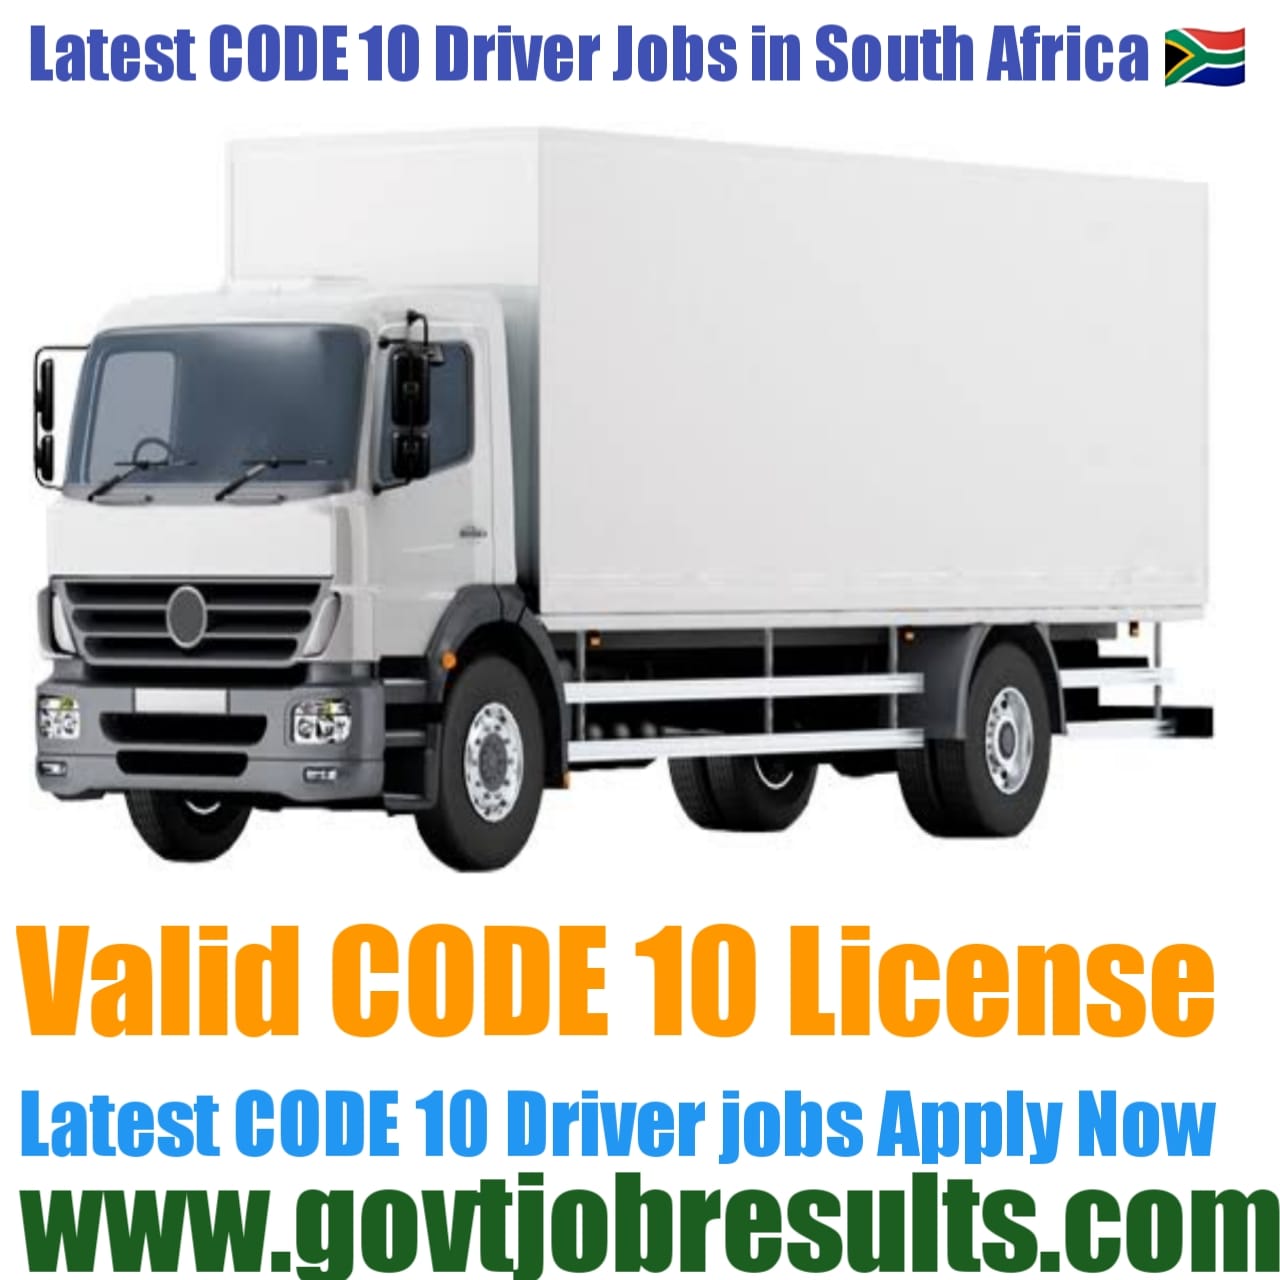 Available job for code 10 driver